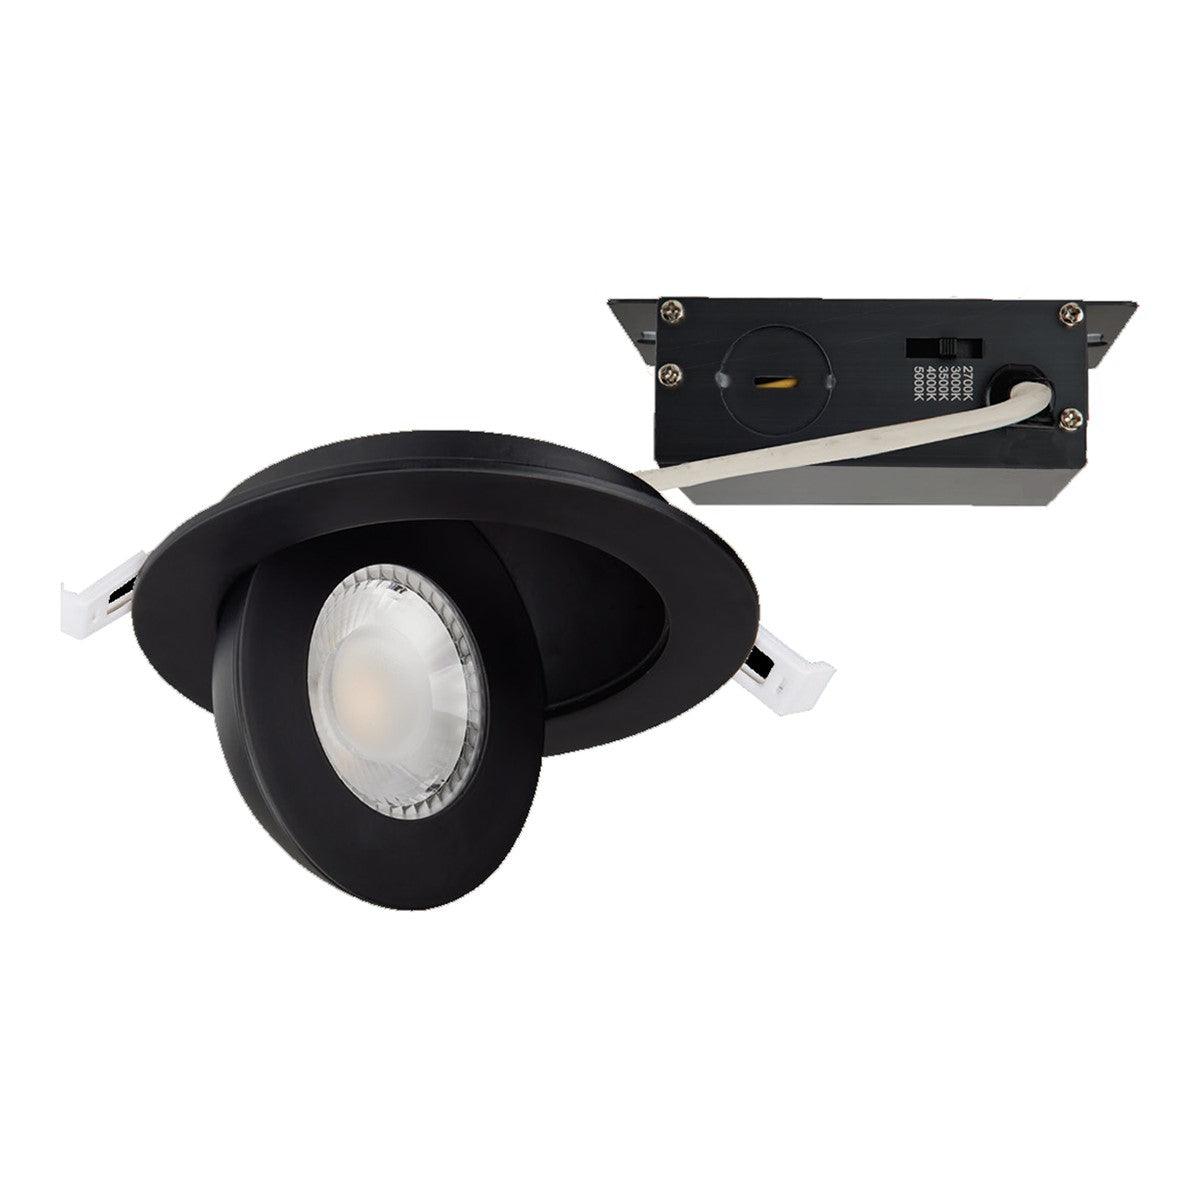 4 Inch Gimbal Canless LED Recessed Light, Round, 9 Watt, 750 Lumens, Selectable CCT, 2700K to 5000K, Remote Driver, Black Finish